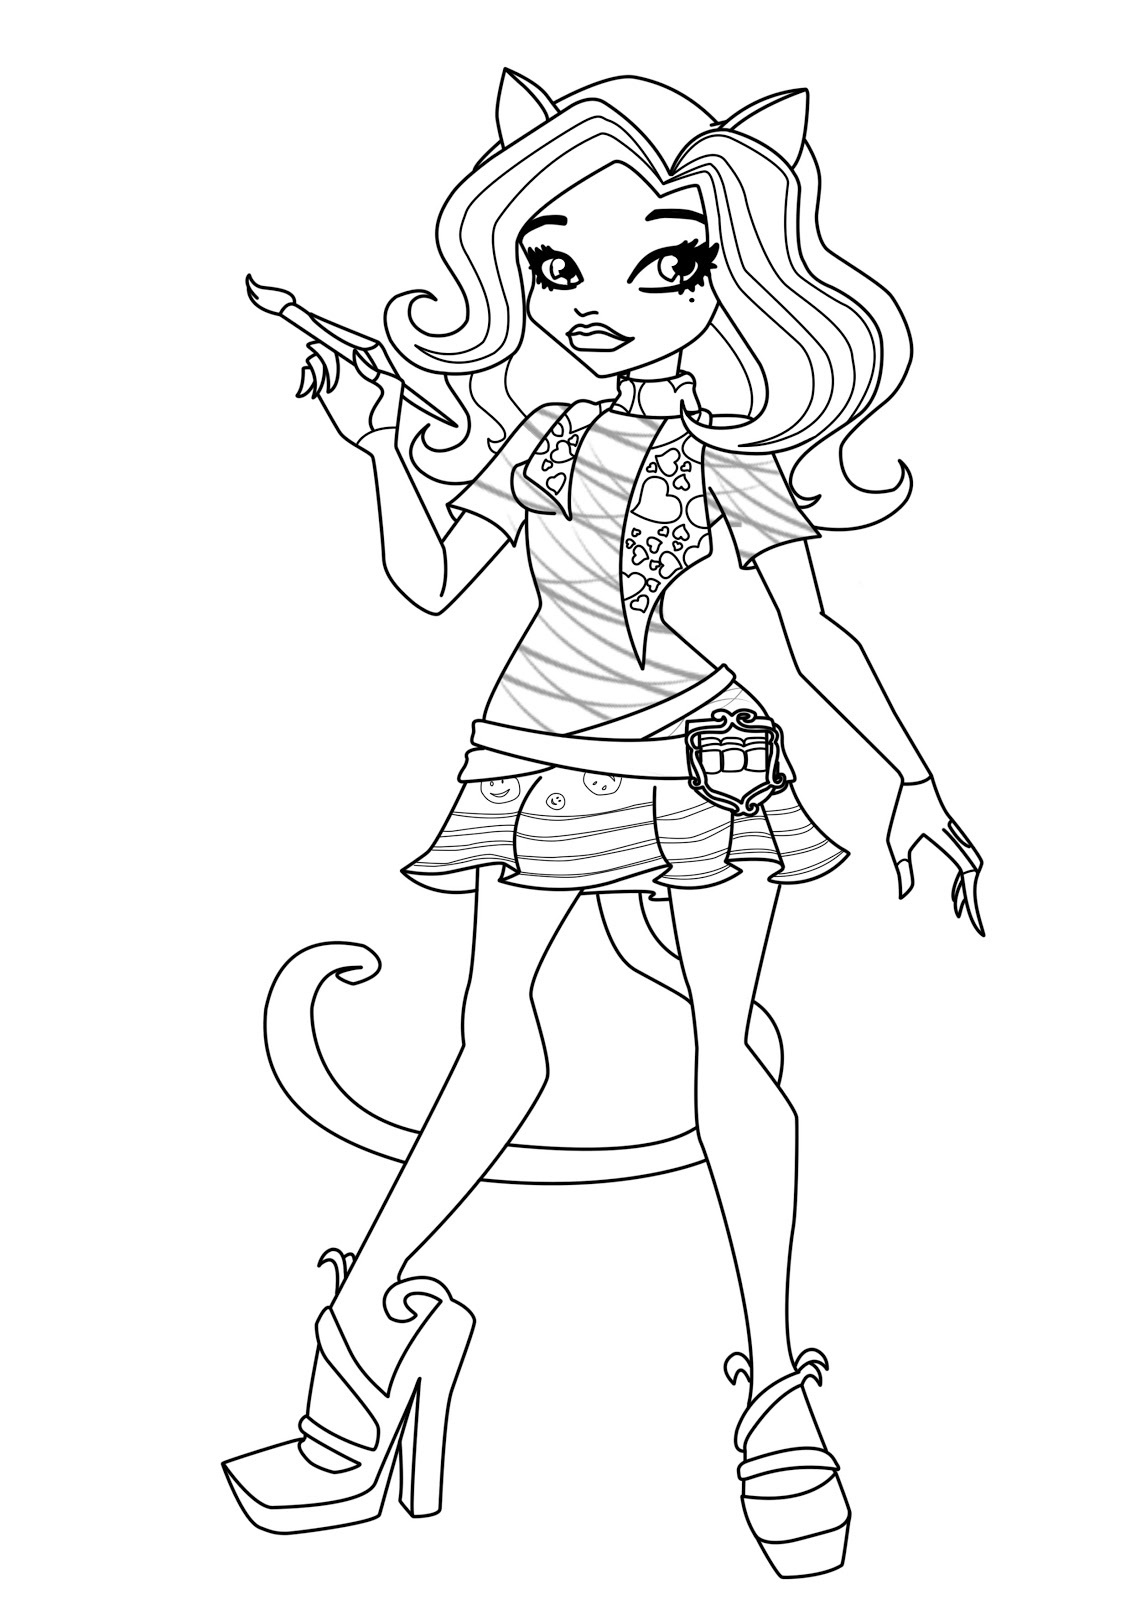 Free Printable Monster High Coloring Pages For Kids Coloring Wallpapers Download Free Images Wallpaper [coloring436.blogspot.com]